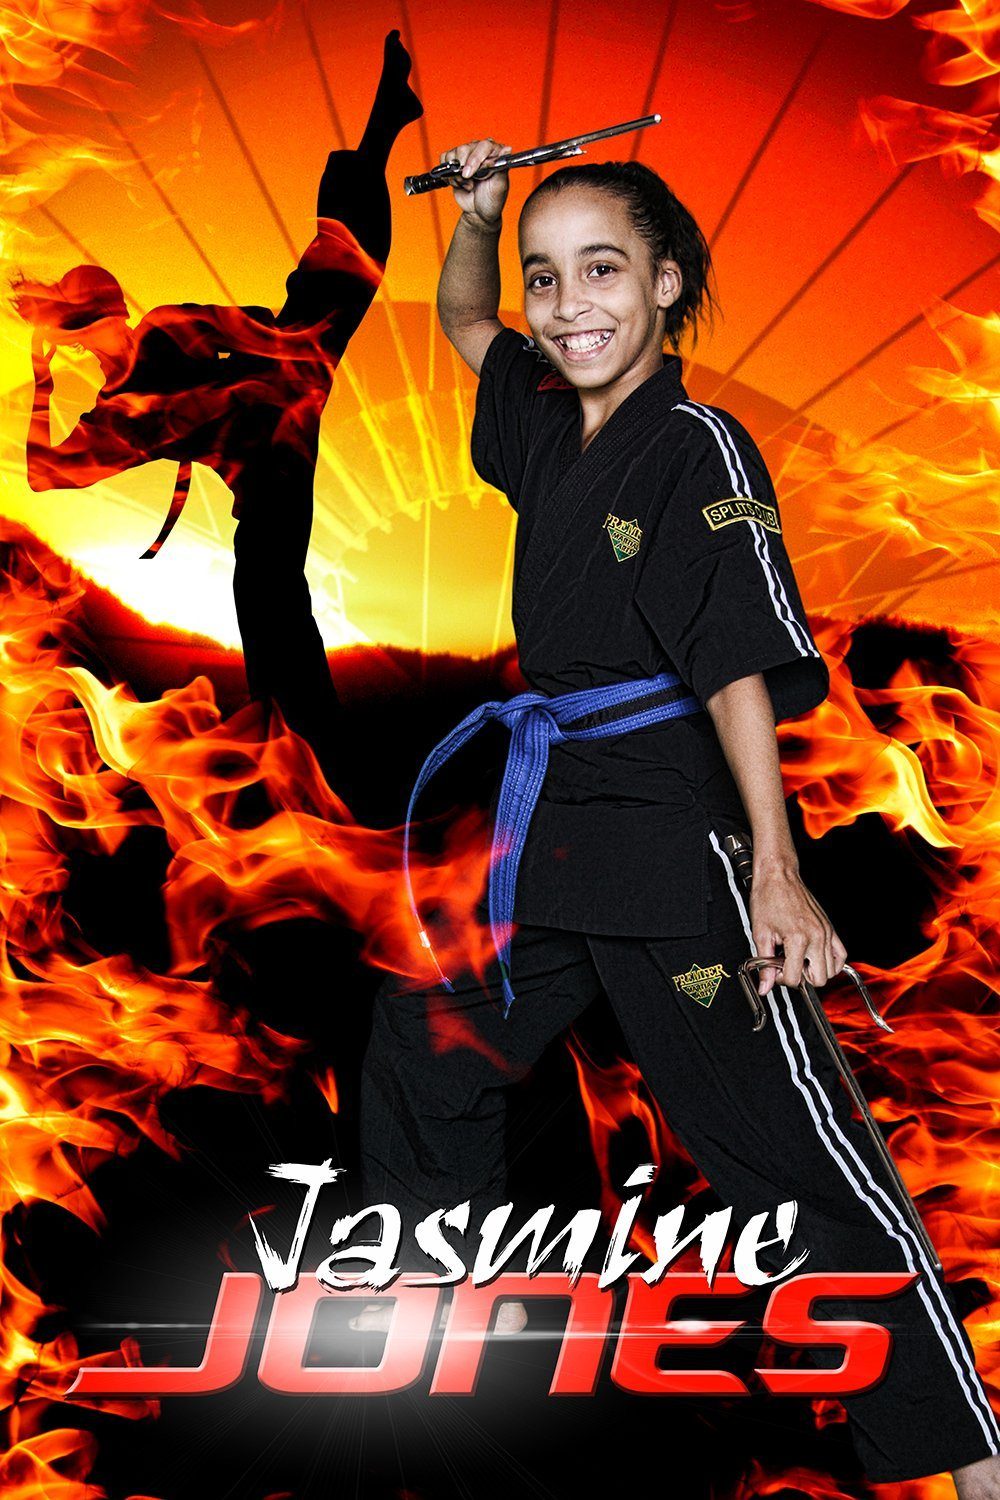 Fire Sunset - Martial Arts Series - Poster/Banner V-Photoshop Template - Photo Solutions